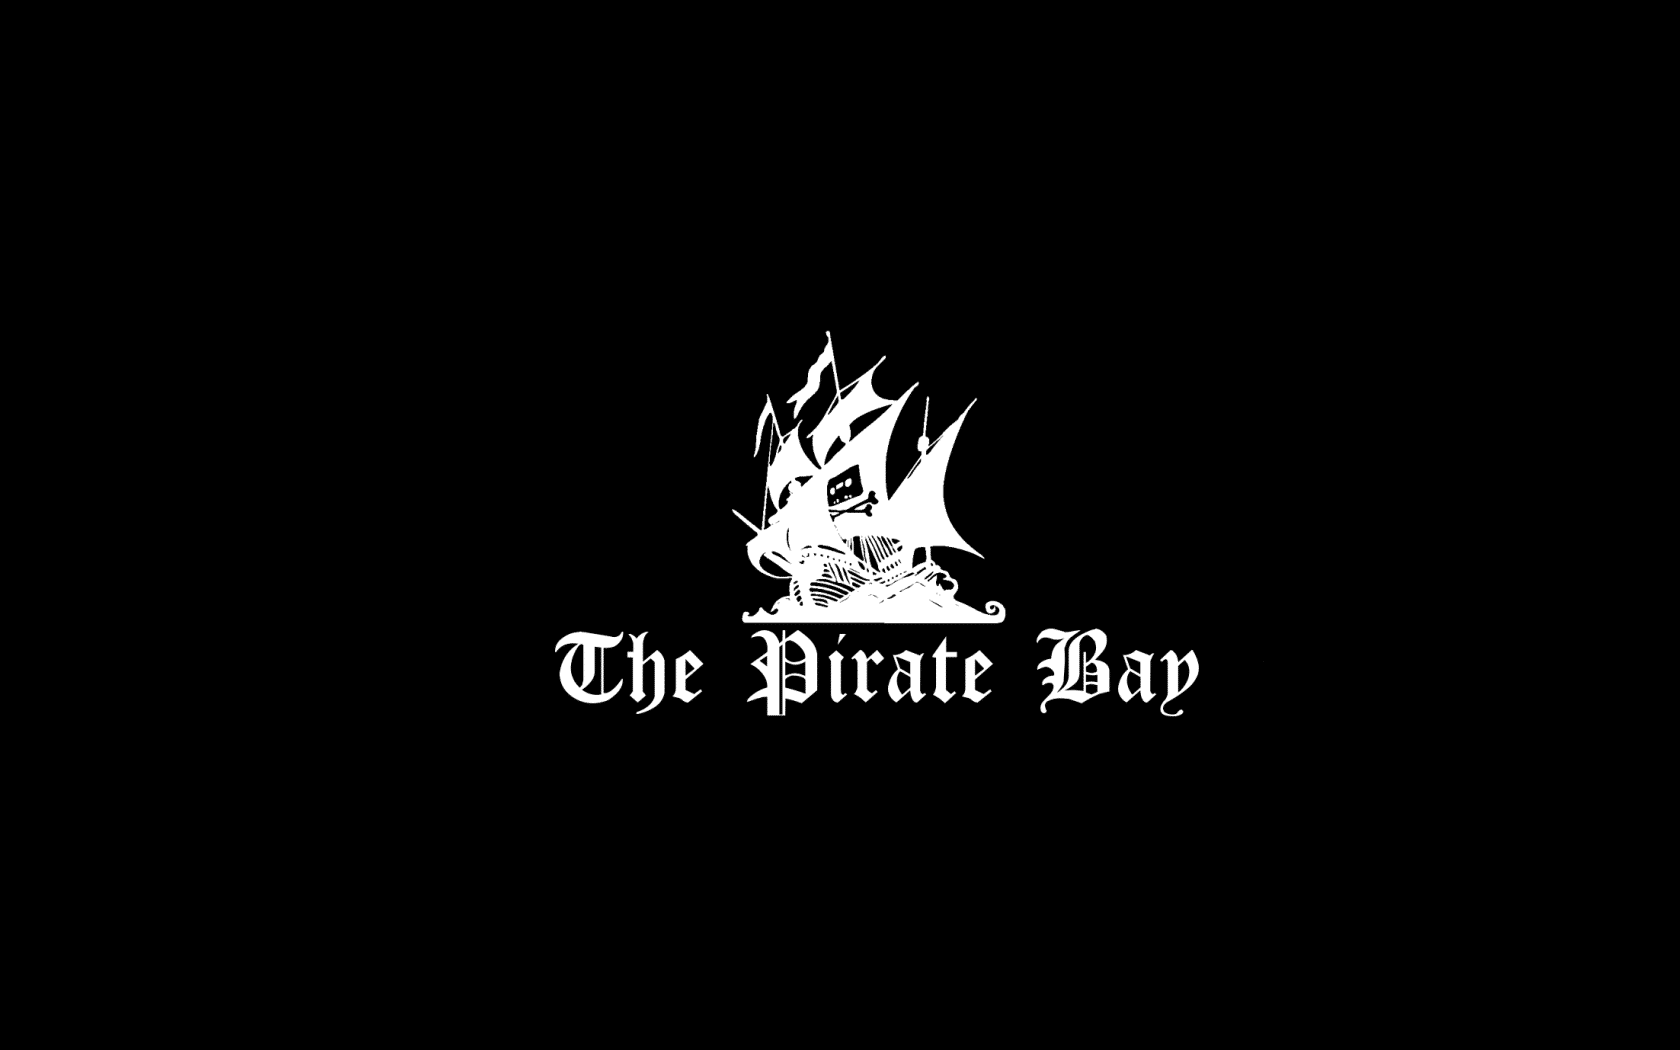 sicario iso the pirate bay